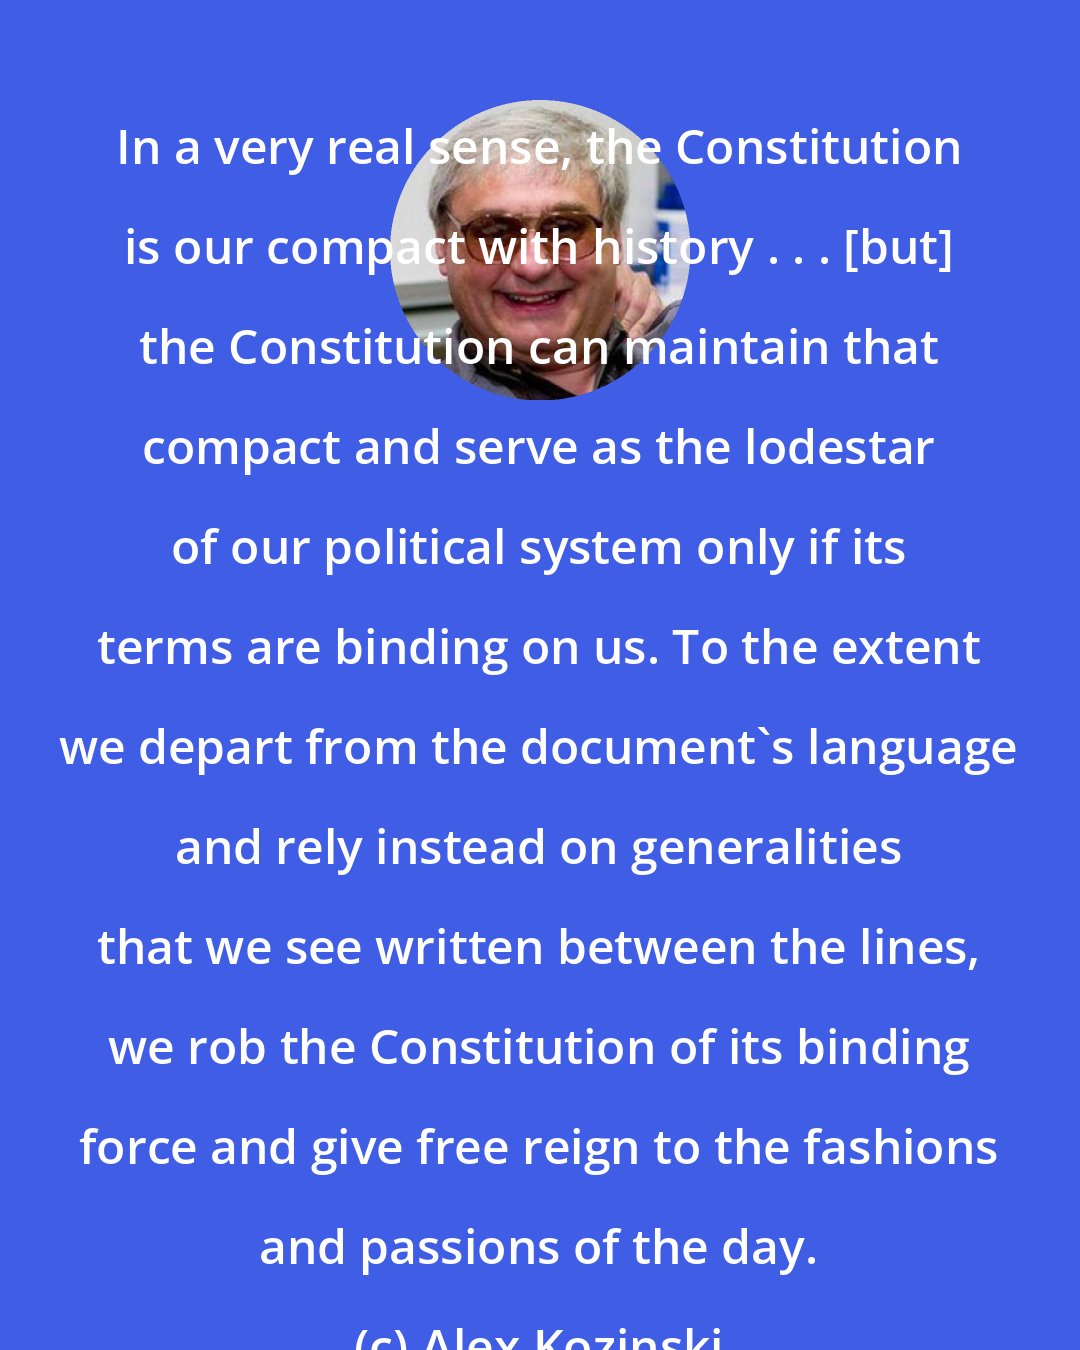 Alex Kozinski: In a very real sense, the Constitution is our compact with history . . . [but] the Constitution can maintain that compact and serve as the lodestar of our political system only if its terms are binding on us. To the extent we depart from the document's language and rely instead on generalities that we see written between the lines, we rob the Constitution of its binding force and give free reign to the fashions and passions of the day.